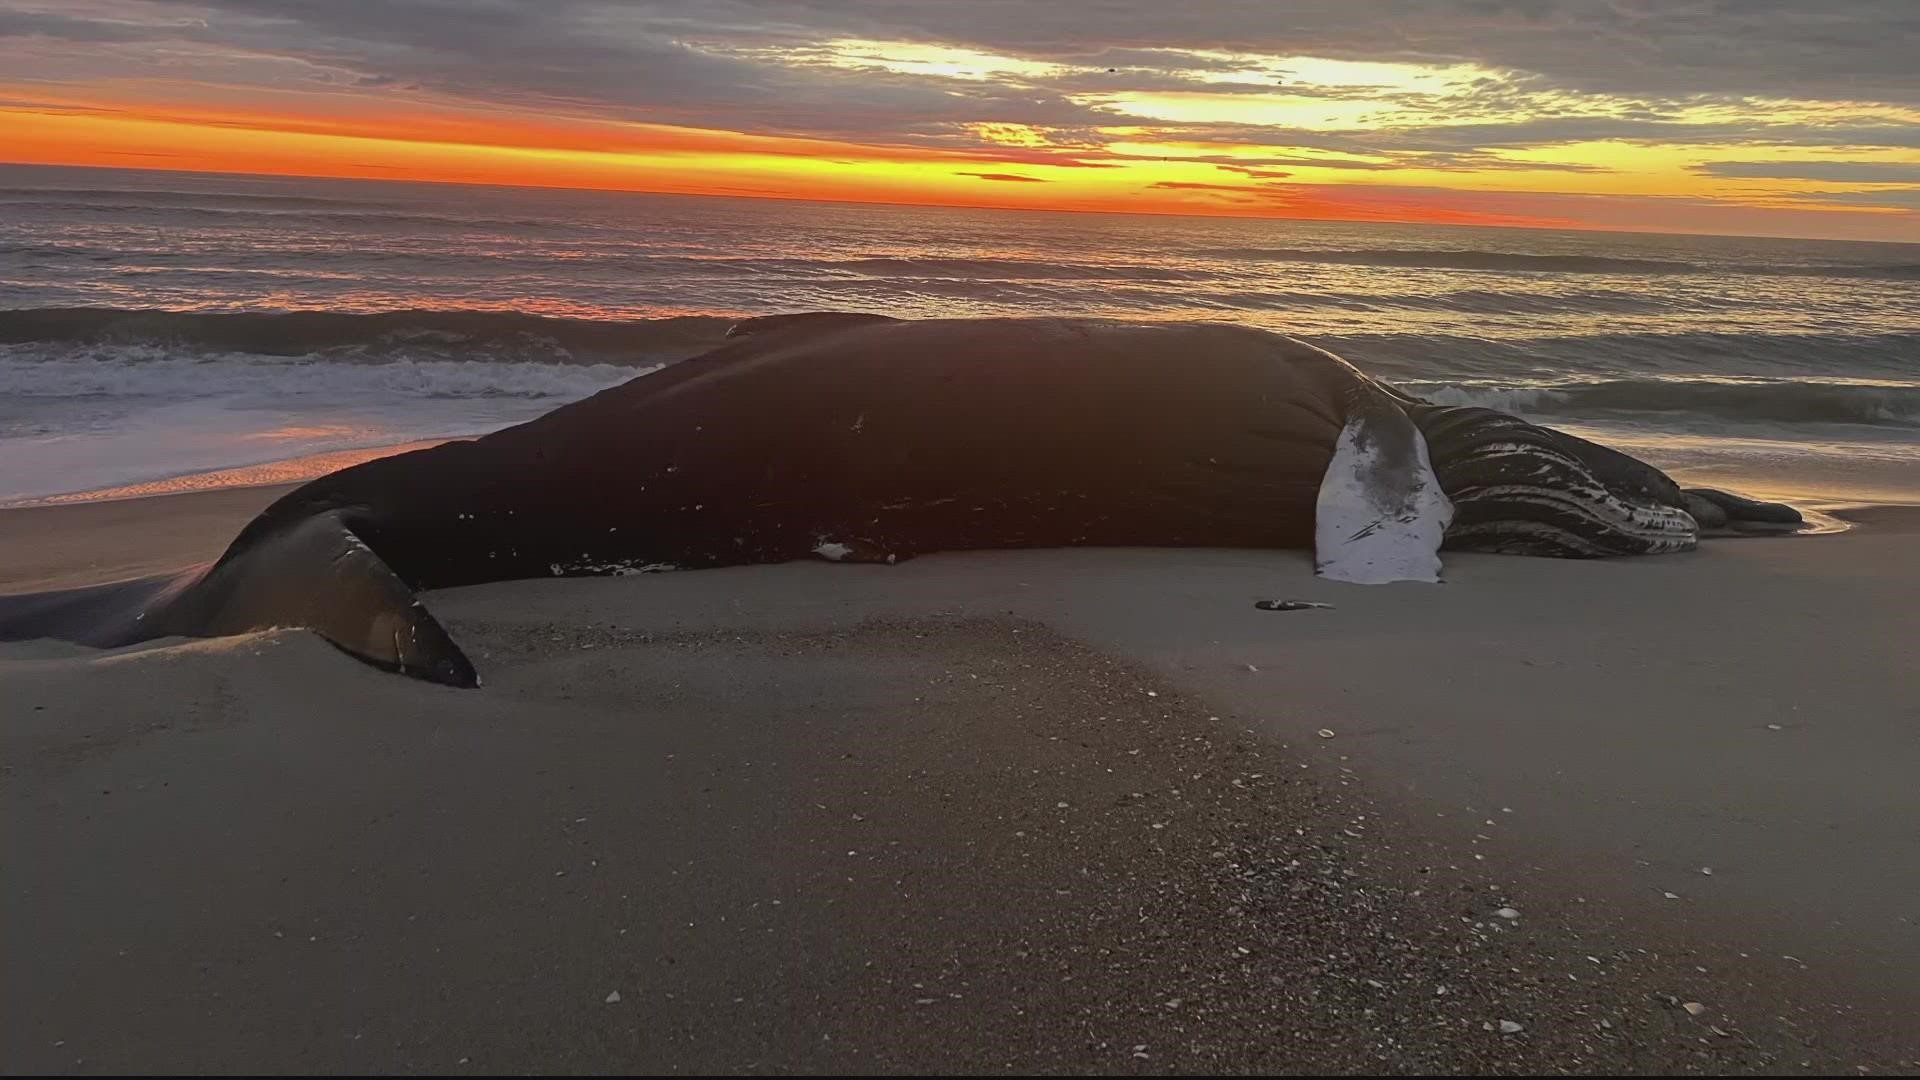 A dead humpback whale washes up on Assateague Island in Maryland. It's further heating up an issue that is pitting two environmental groups against another.